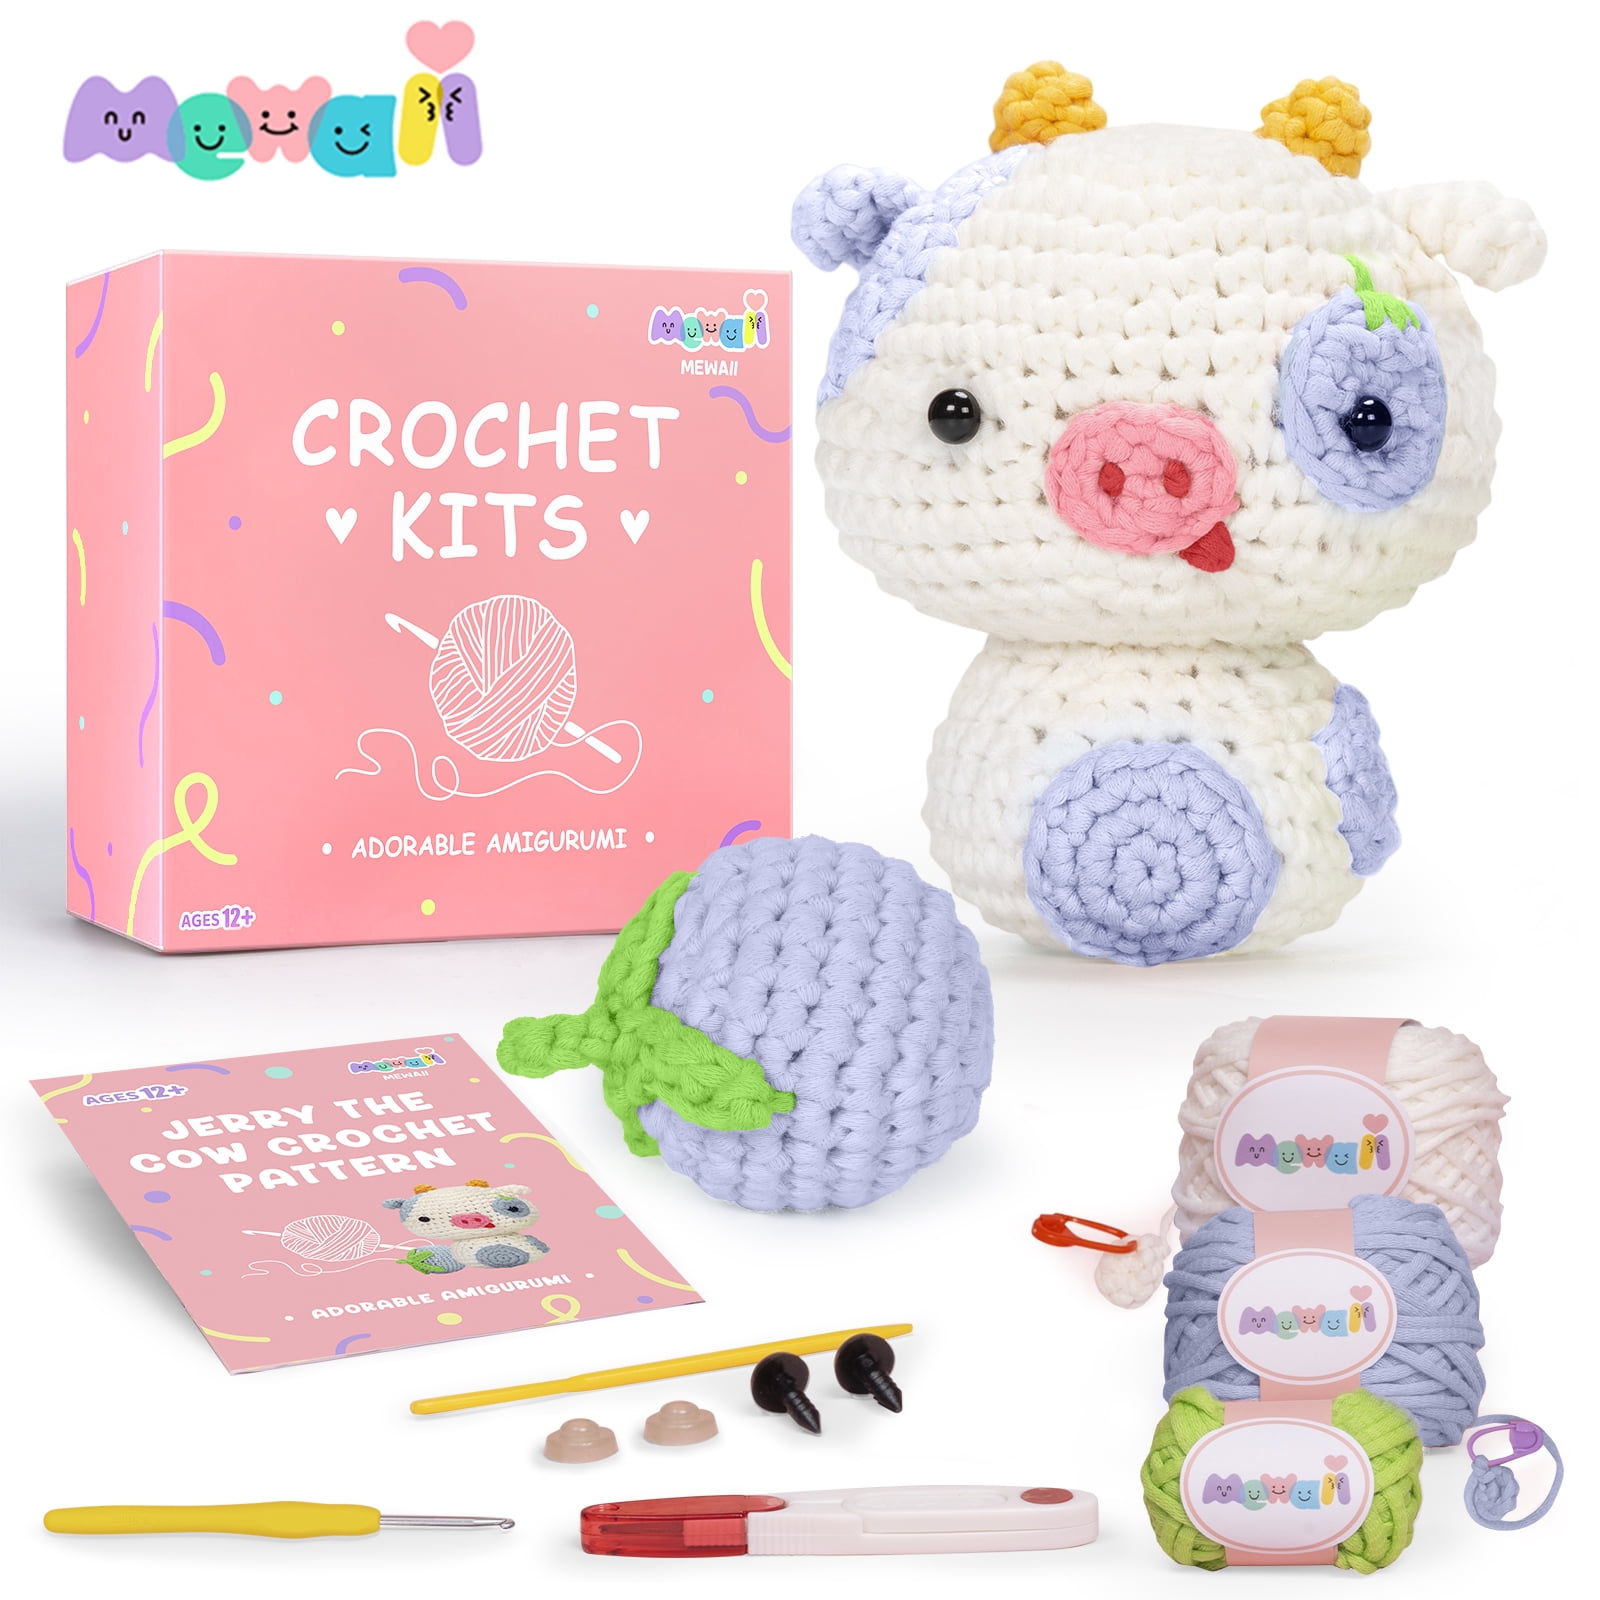  Mewaii Crochet Kit for Beginners with 4 Mushroom Plush,  Complete DIY Crochet Kit with 40%+ Pre-Started Tape Yarn Step-by-Step Video  Tutorials for Adults and Kids (Blueberry Cow with Sample Plush)